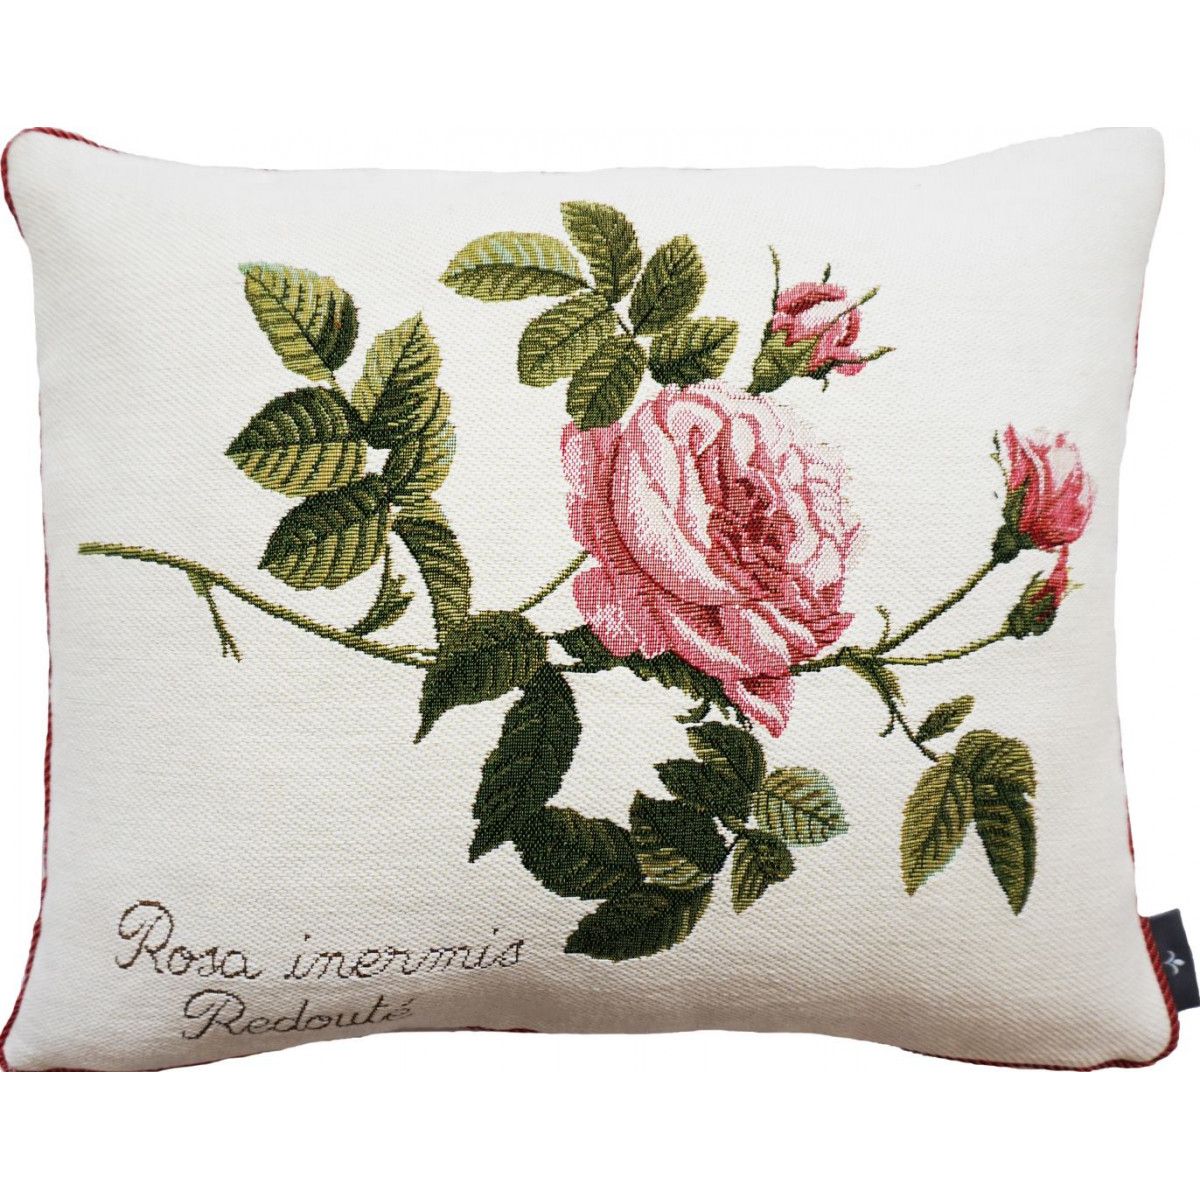 coussin rosa inermis made in france, france